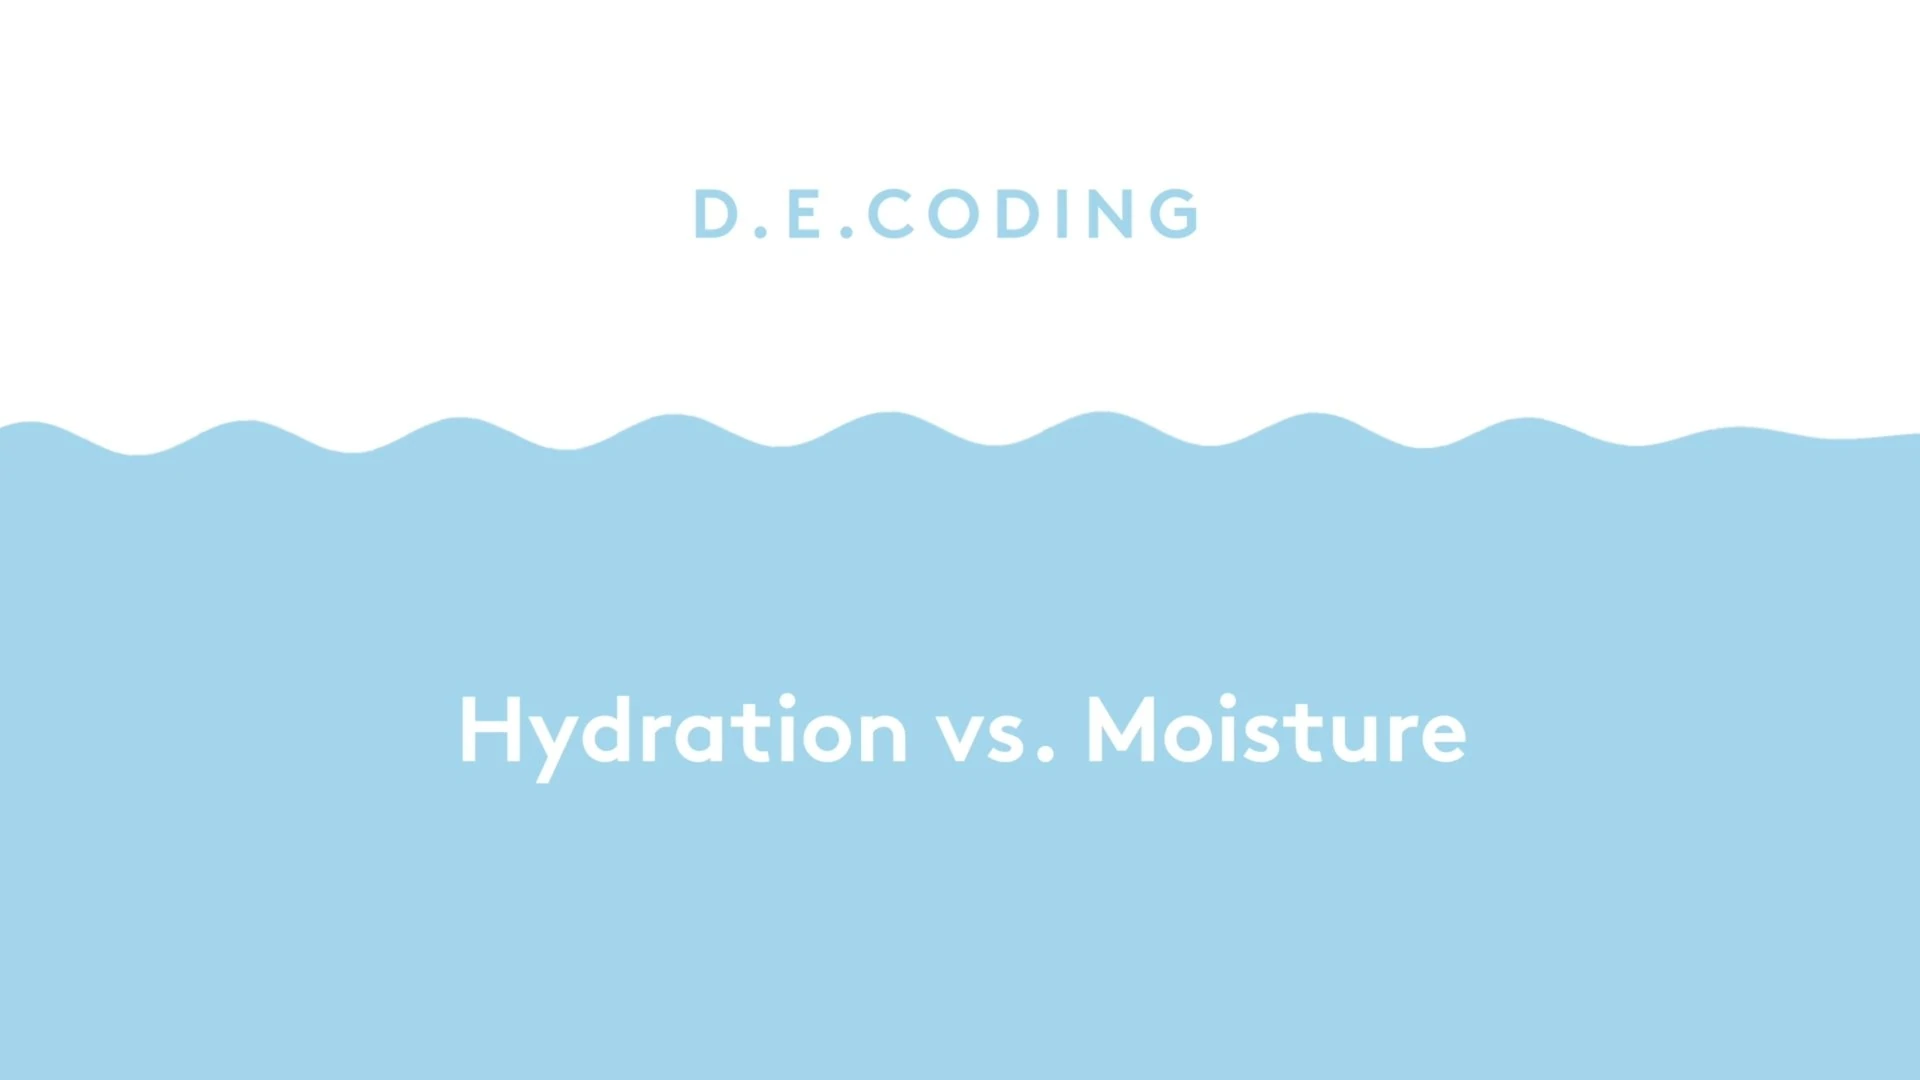 video explaining the differences between hydration and moisture in the skin